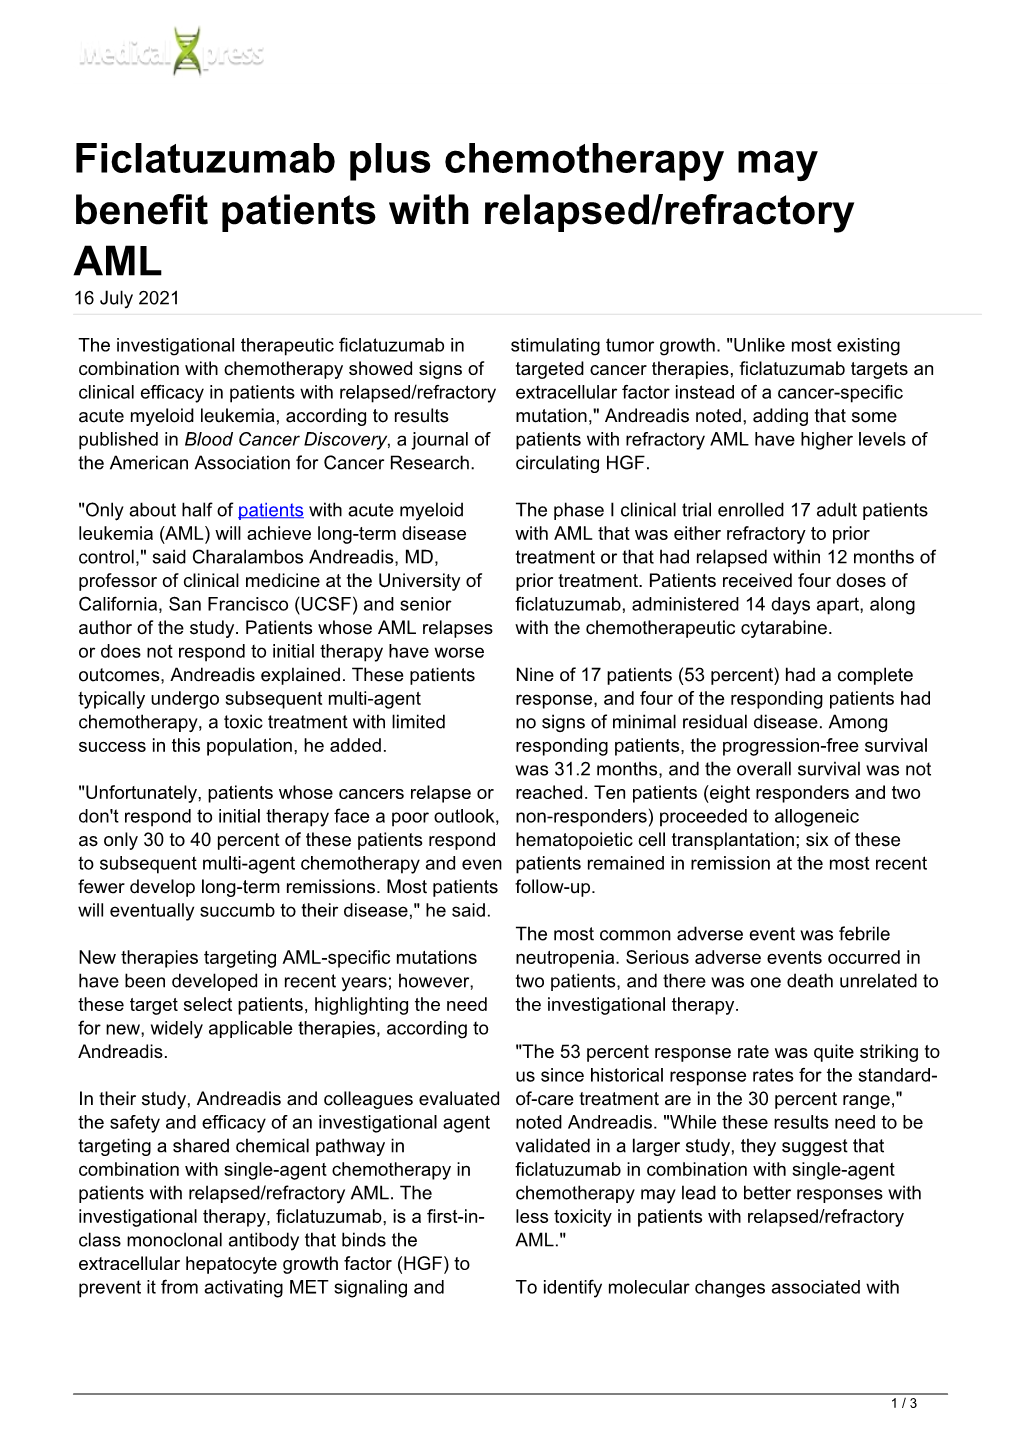 Ficlatuzumab Plus Chemotherapy May Benefit Patients with Relapsed/Refractory AML 16 July 2021